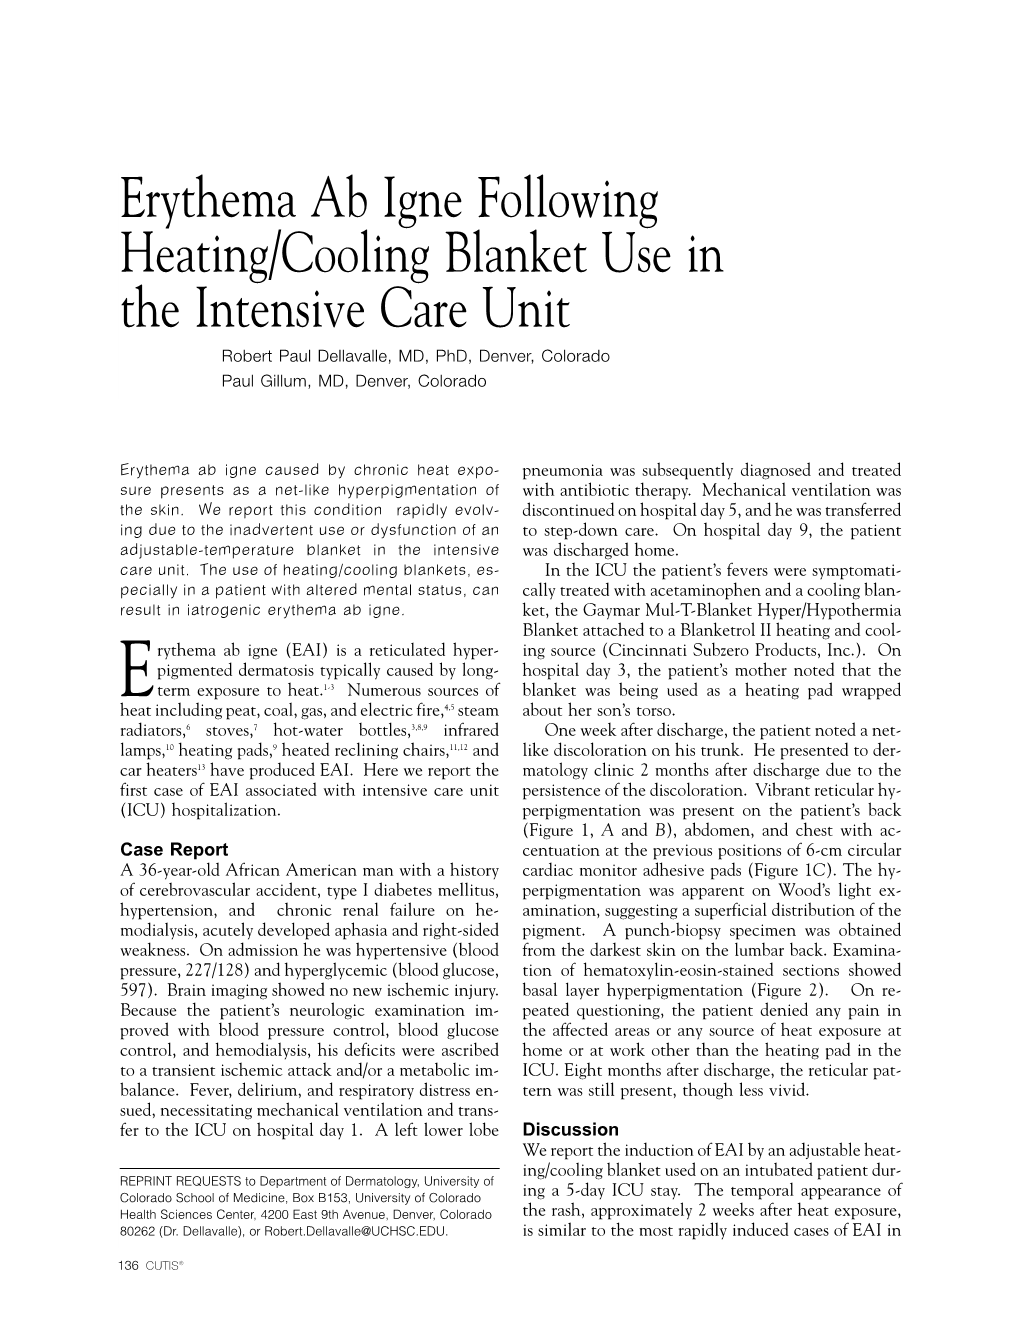 Erythema Ab Igne Following Heating/Cooling Blanket Use in the Intensive Care Unit Robert Paul Dellavalle, MD, Phd, Denver, Colorado Paul Gillum, MD, Denver, Colorado